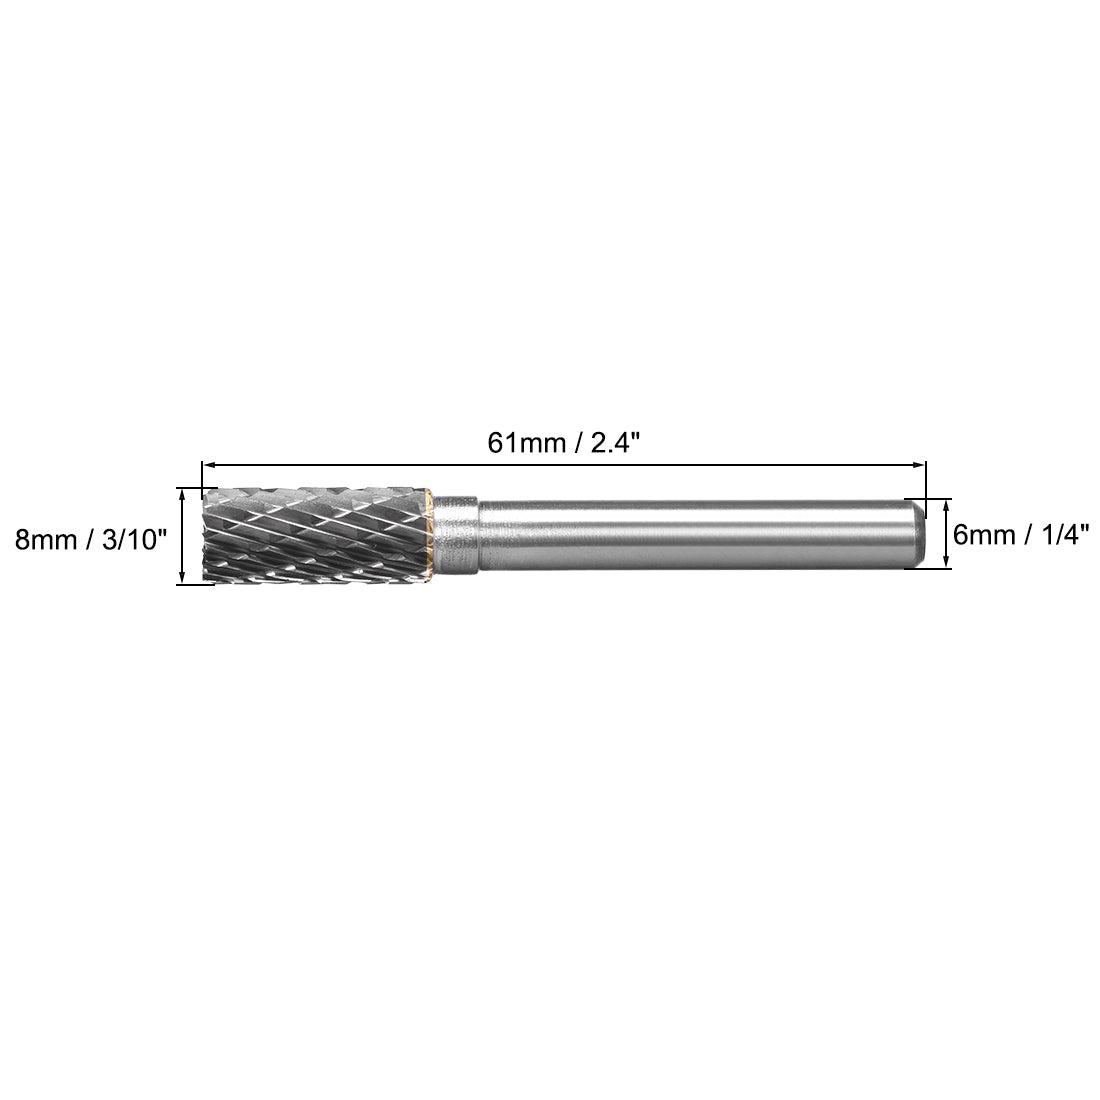 uxcell Uxcell Tungsten Carbide YG8 Double Cut Rotary Burrs File 8mm Cylinder Shape 1/4" Shank